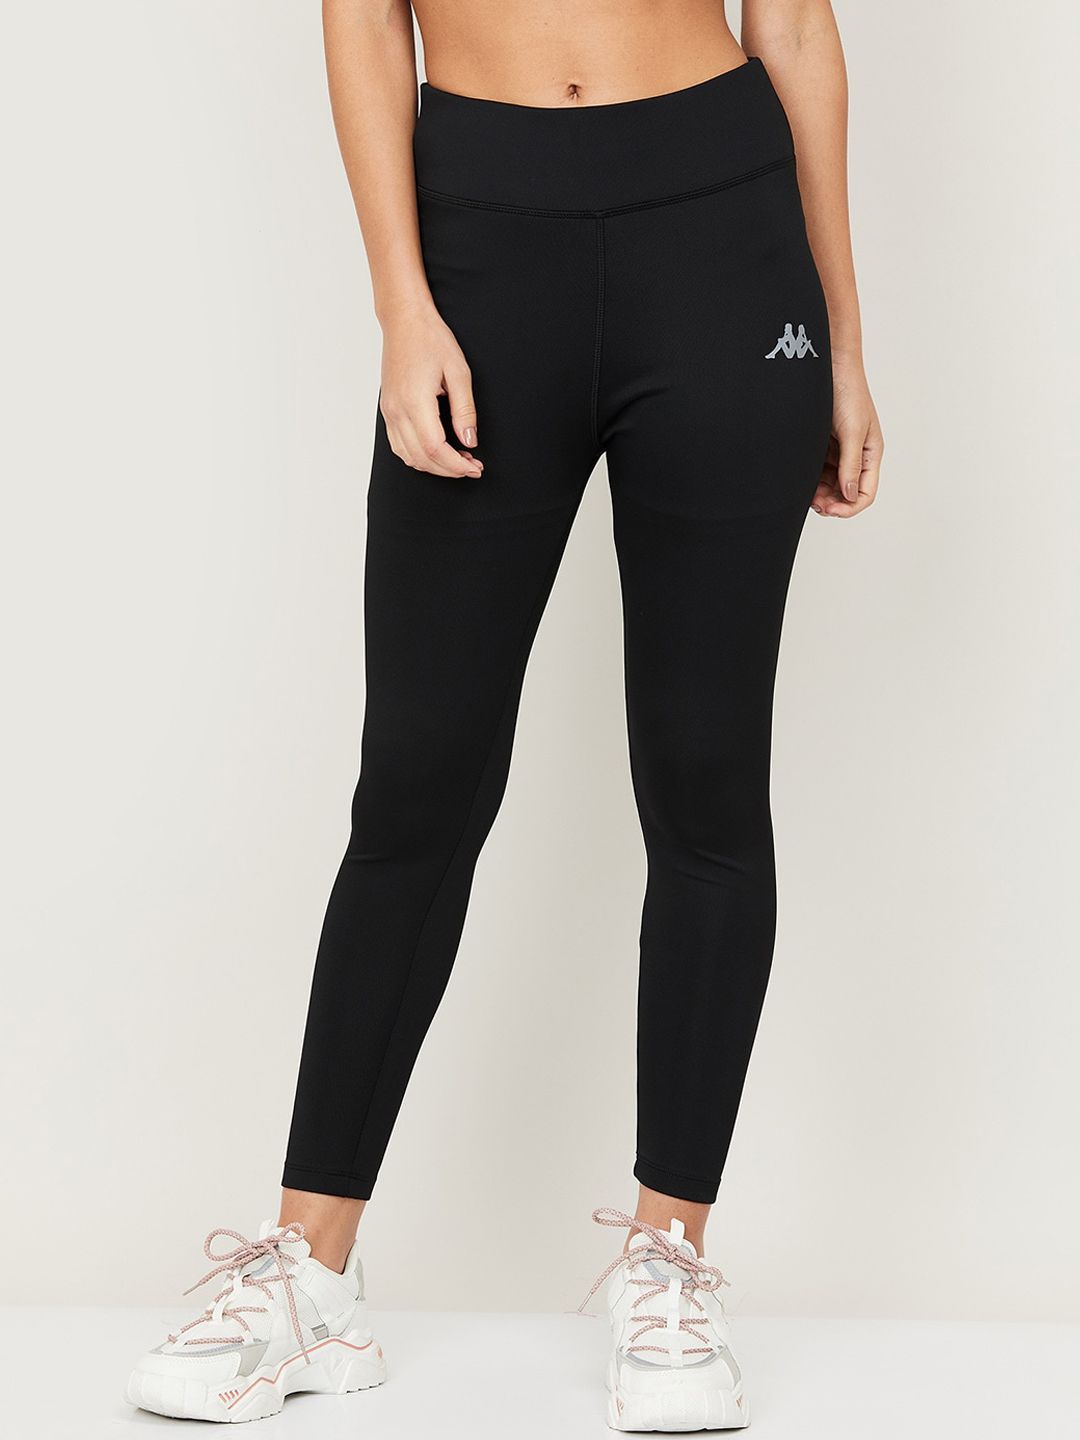 Kappa Women Black Solid Tights Price in India